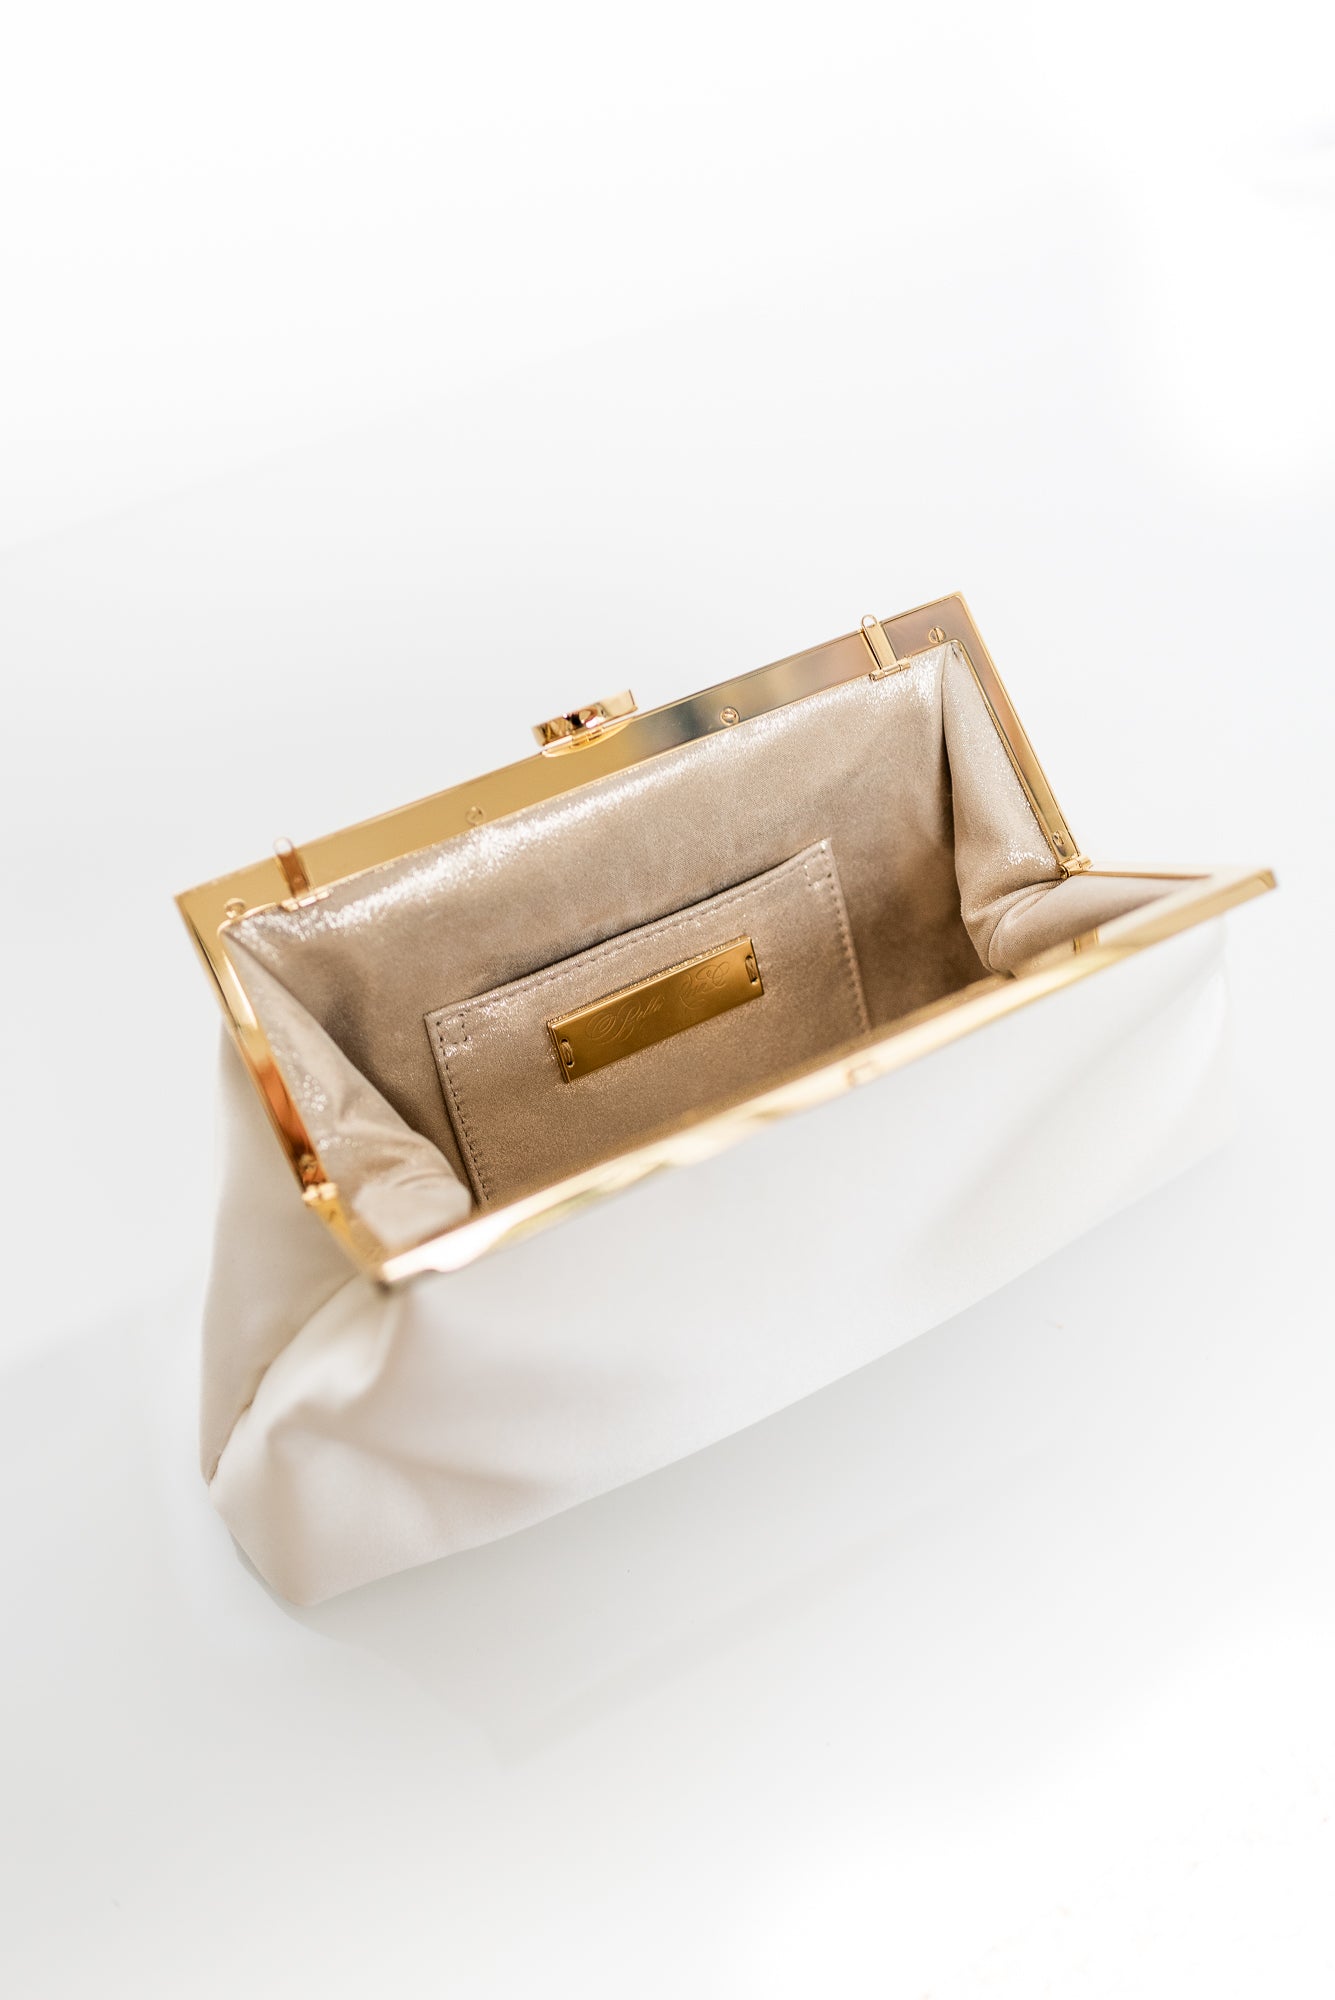 An open, empty beige The Bella Rosa Collection Rosa Clutch Monogram Embroidery purse with floral embroidery and a metallic clasp, photographed against a white background.